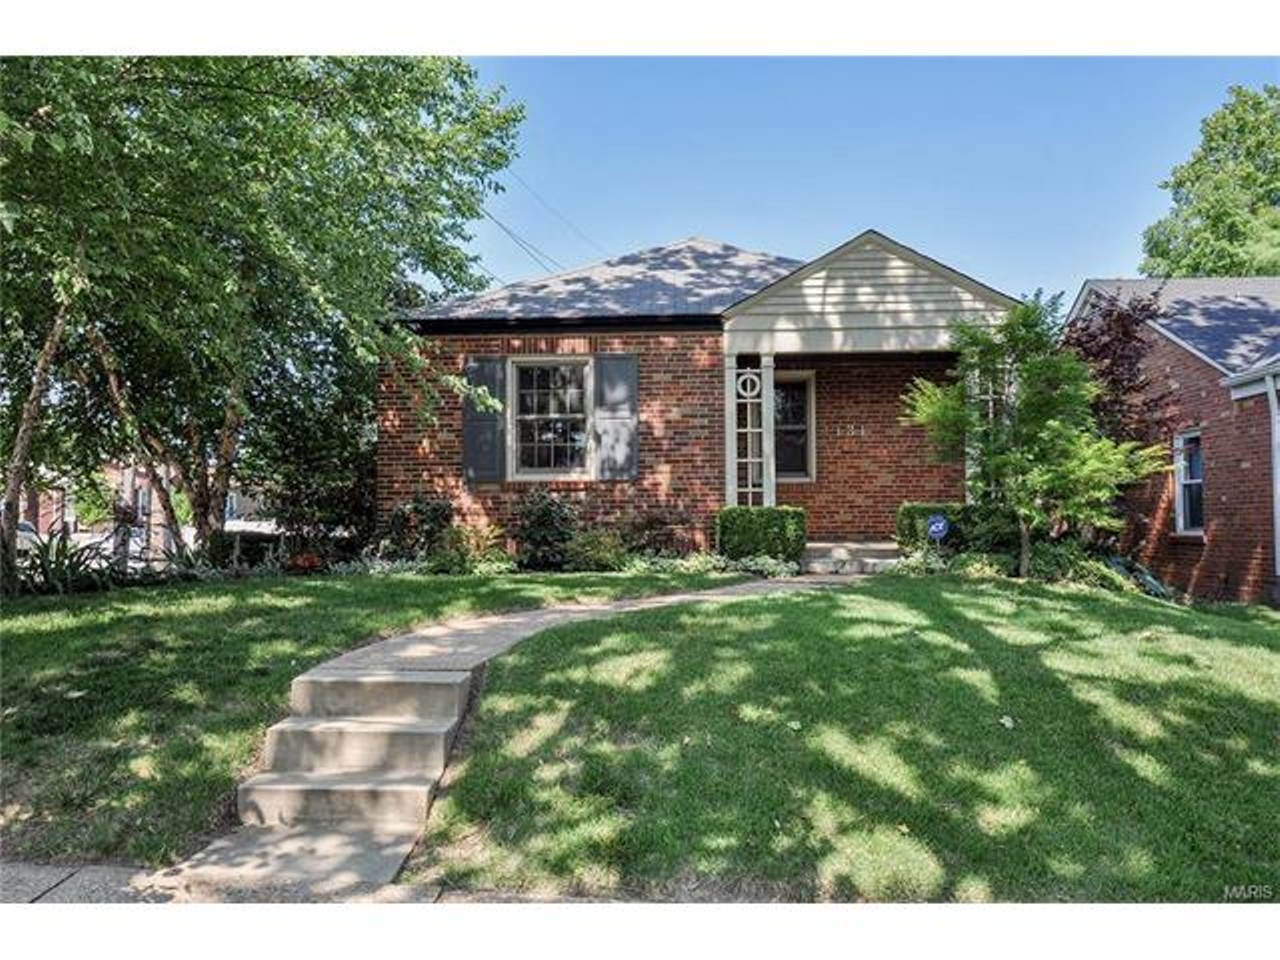 1131 Childress Avenue
St Louis, MO , 63139
$189,900
2 beds / 1 baths / 994 sqft / 4,051 lot sqft
Five minute walk. Directions here. 
This adorable home is nestled right by Heavy Riff Brewing Company, Felix's Pizza Pub and everything there is to do in Dogtown.